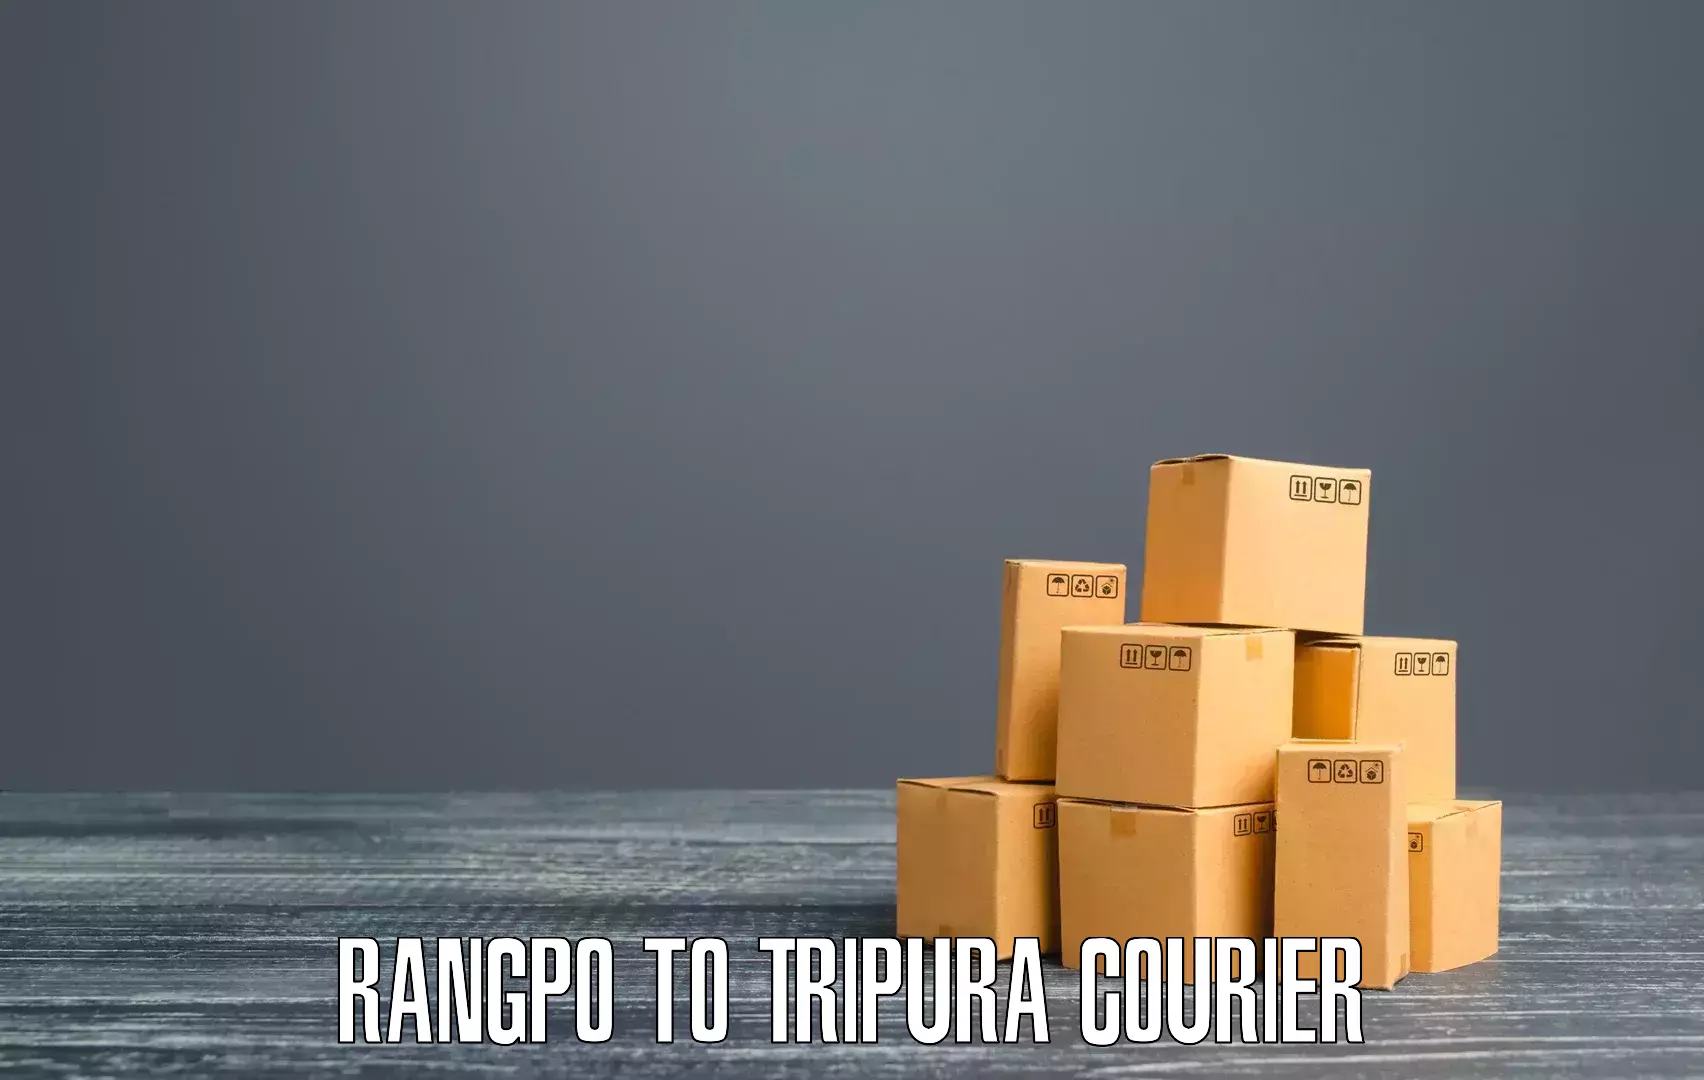 Sustainable delivery practices in Rangpo to Tripura